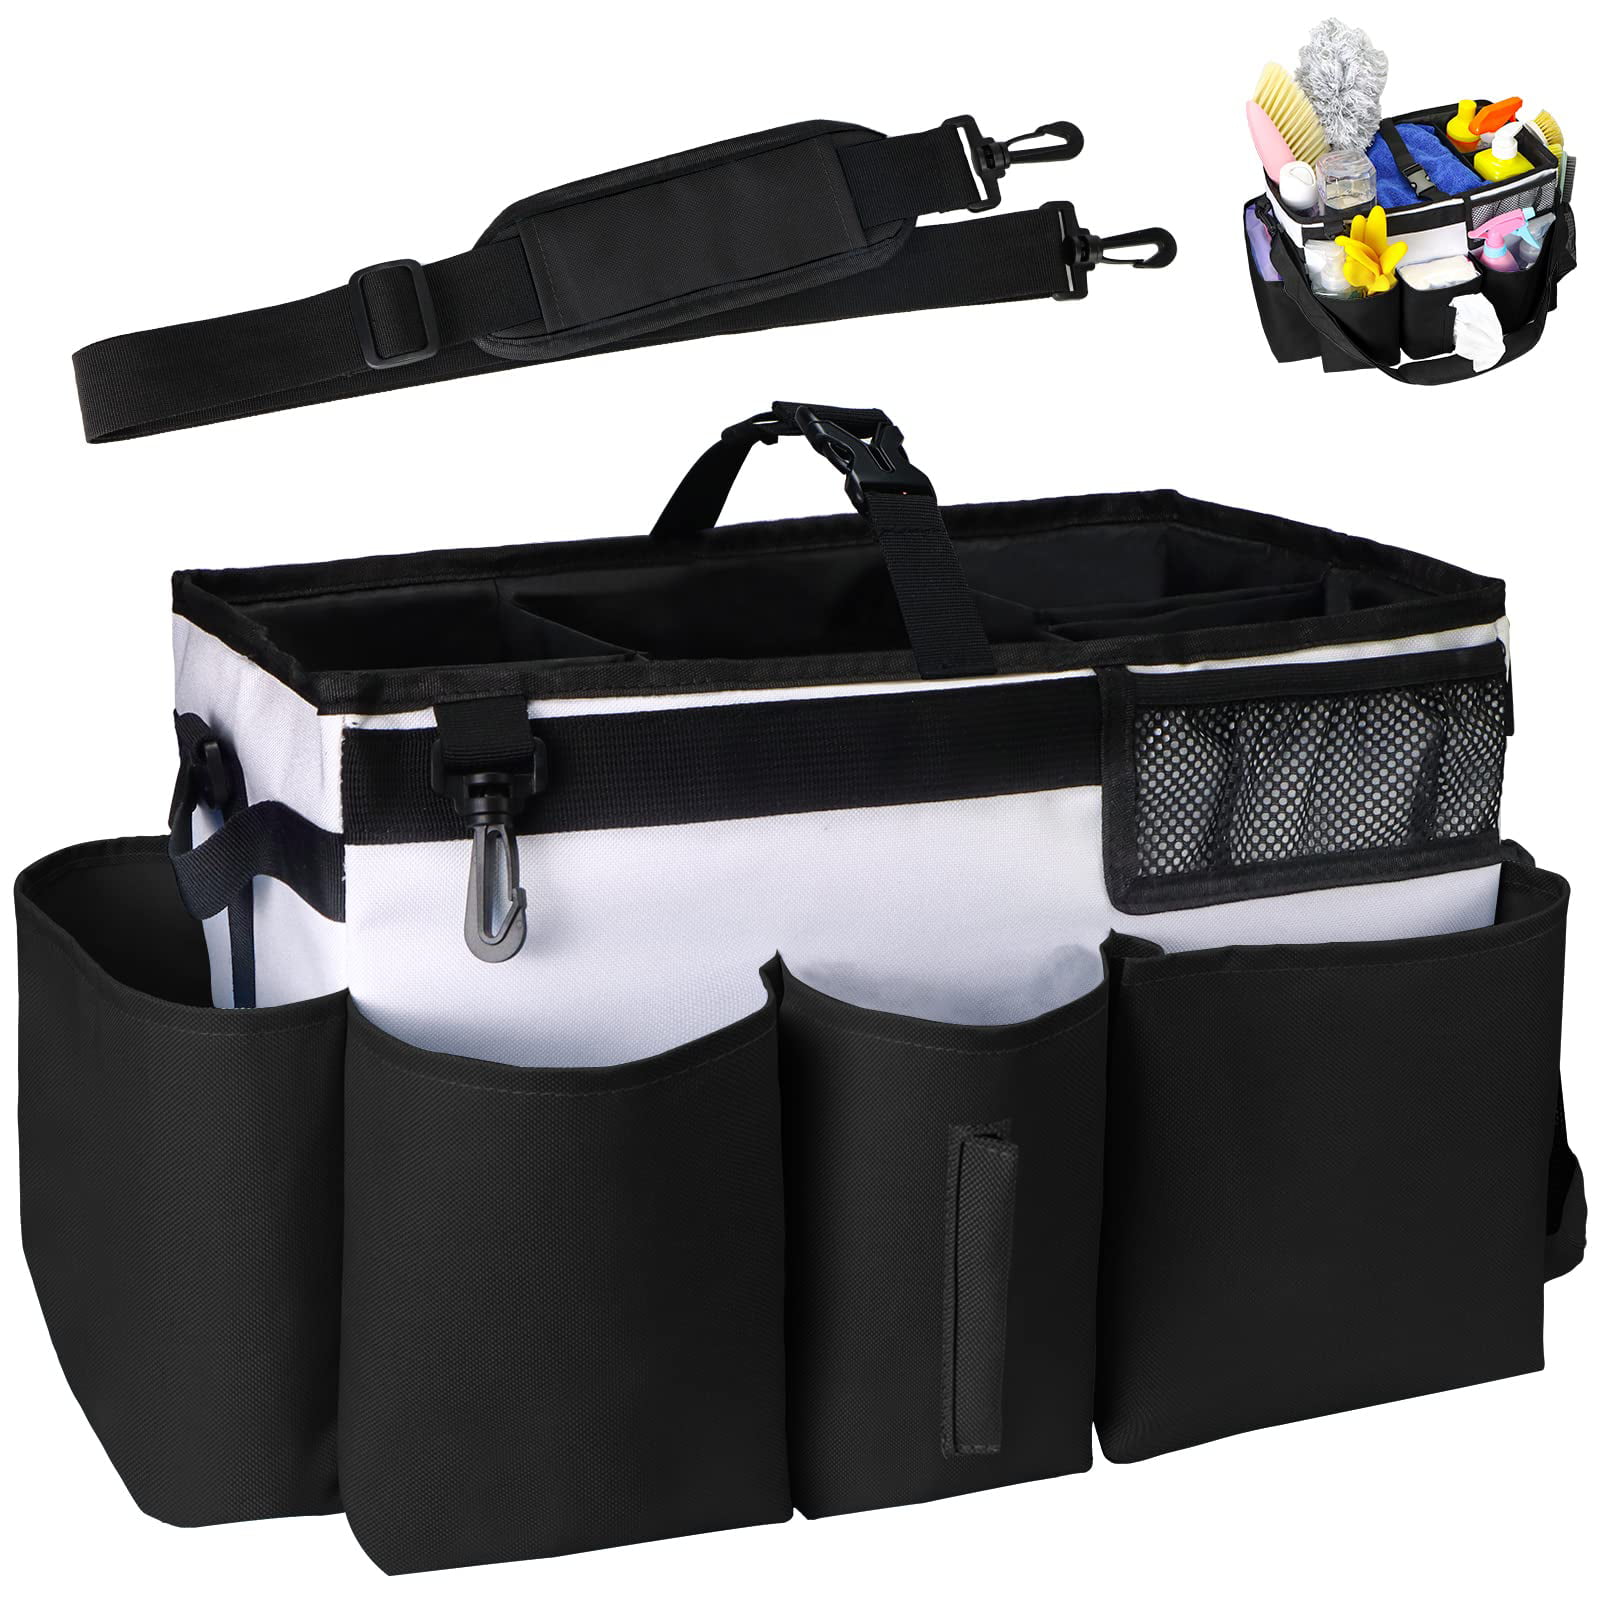 Buy Wholesale China High Quality Large Wearable Cleaning Caddy Bag